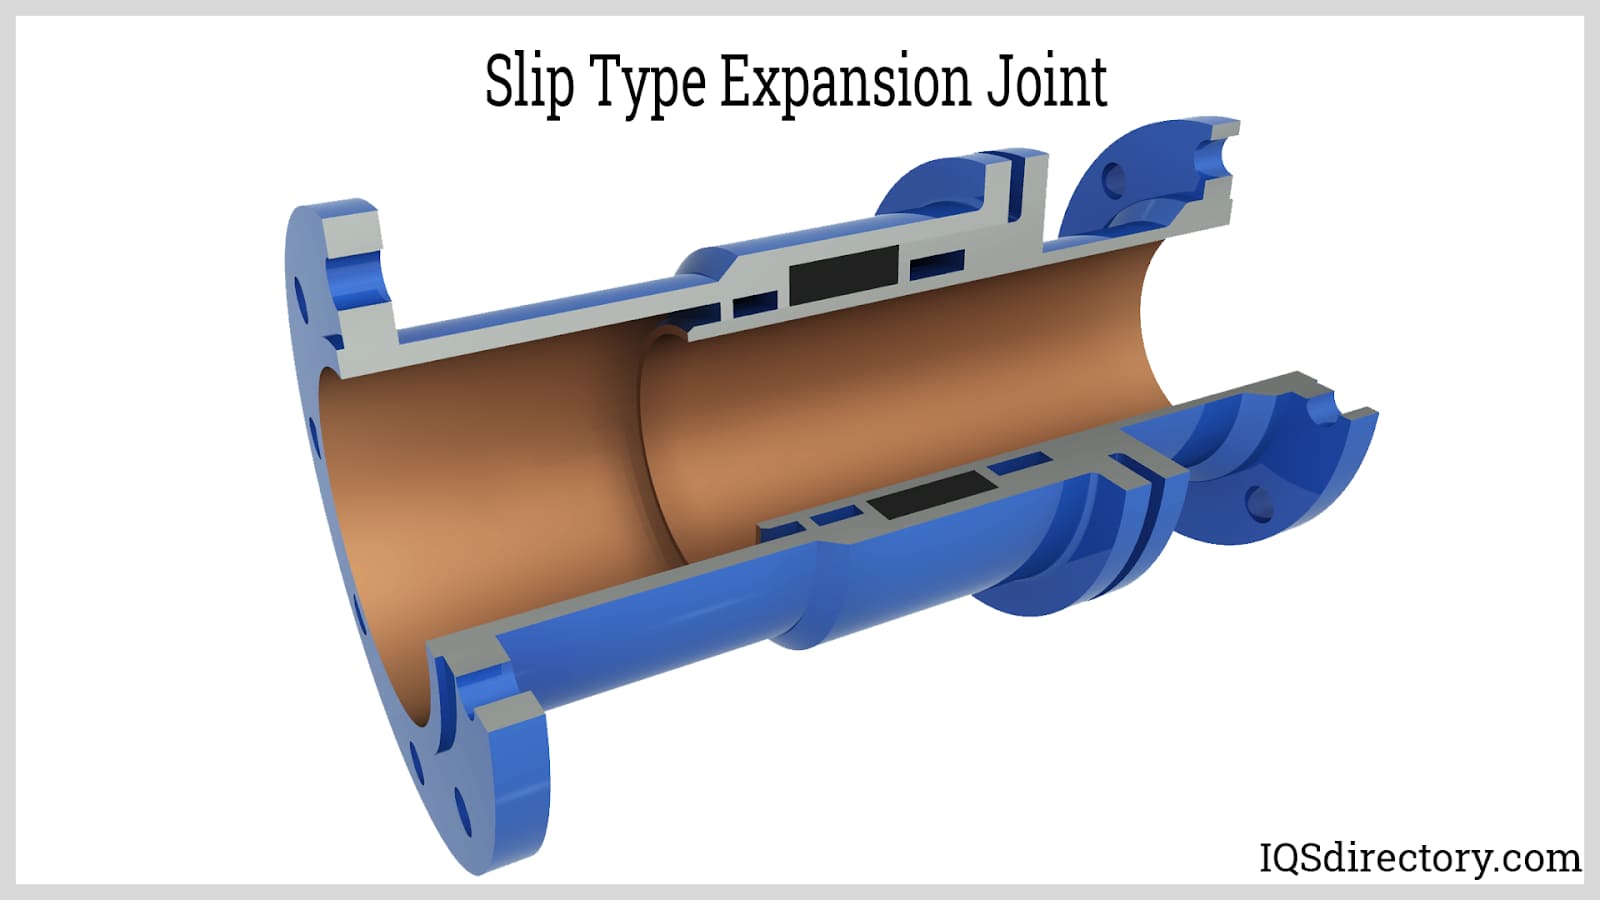 Slip Type Expansion Joint